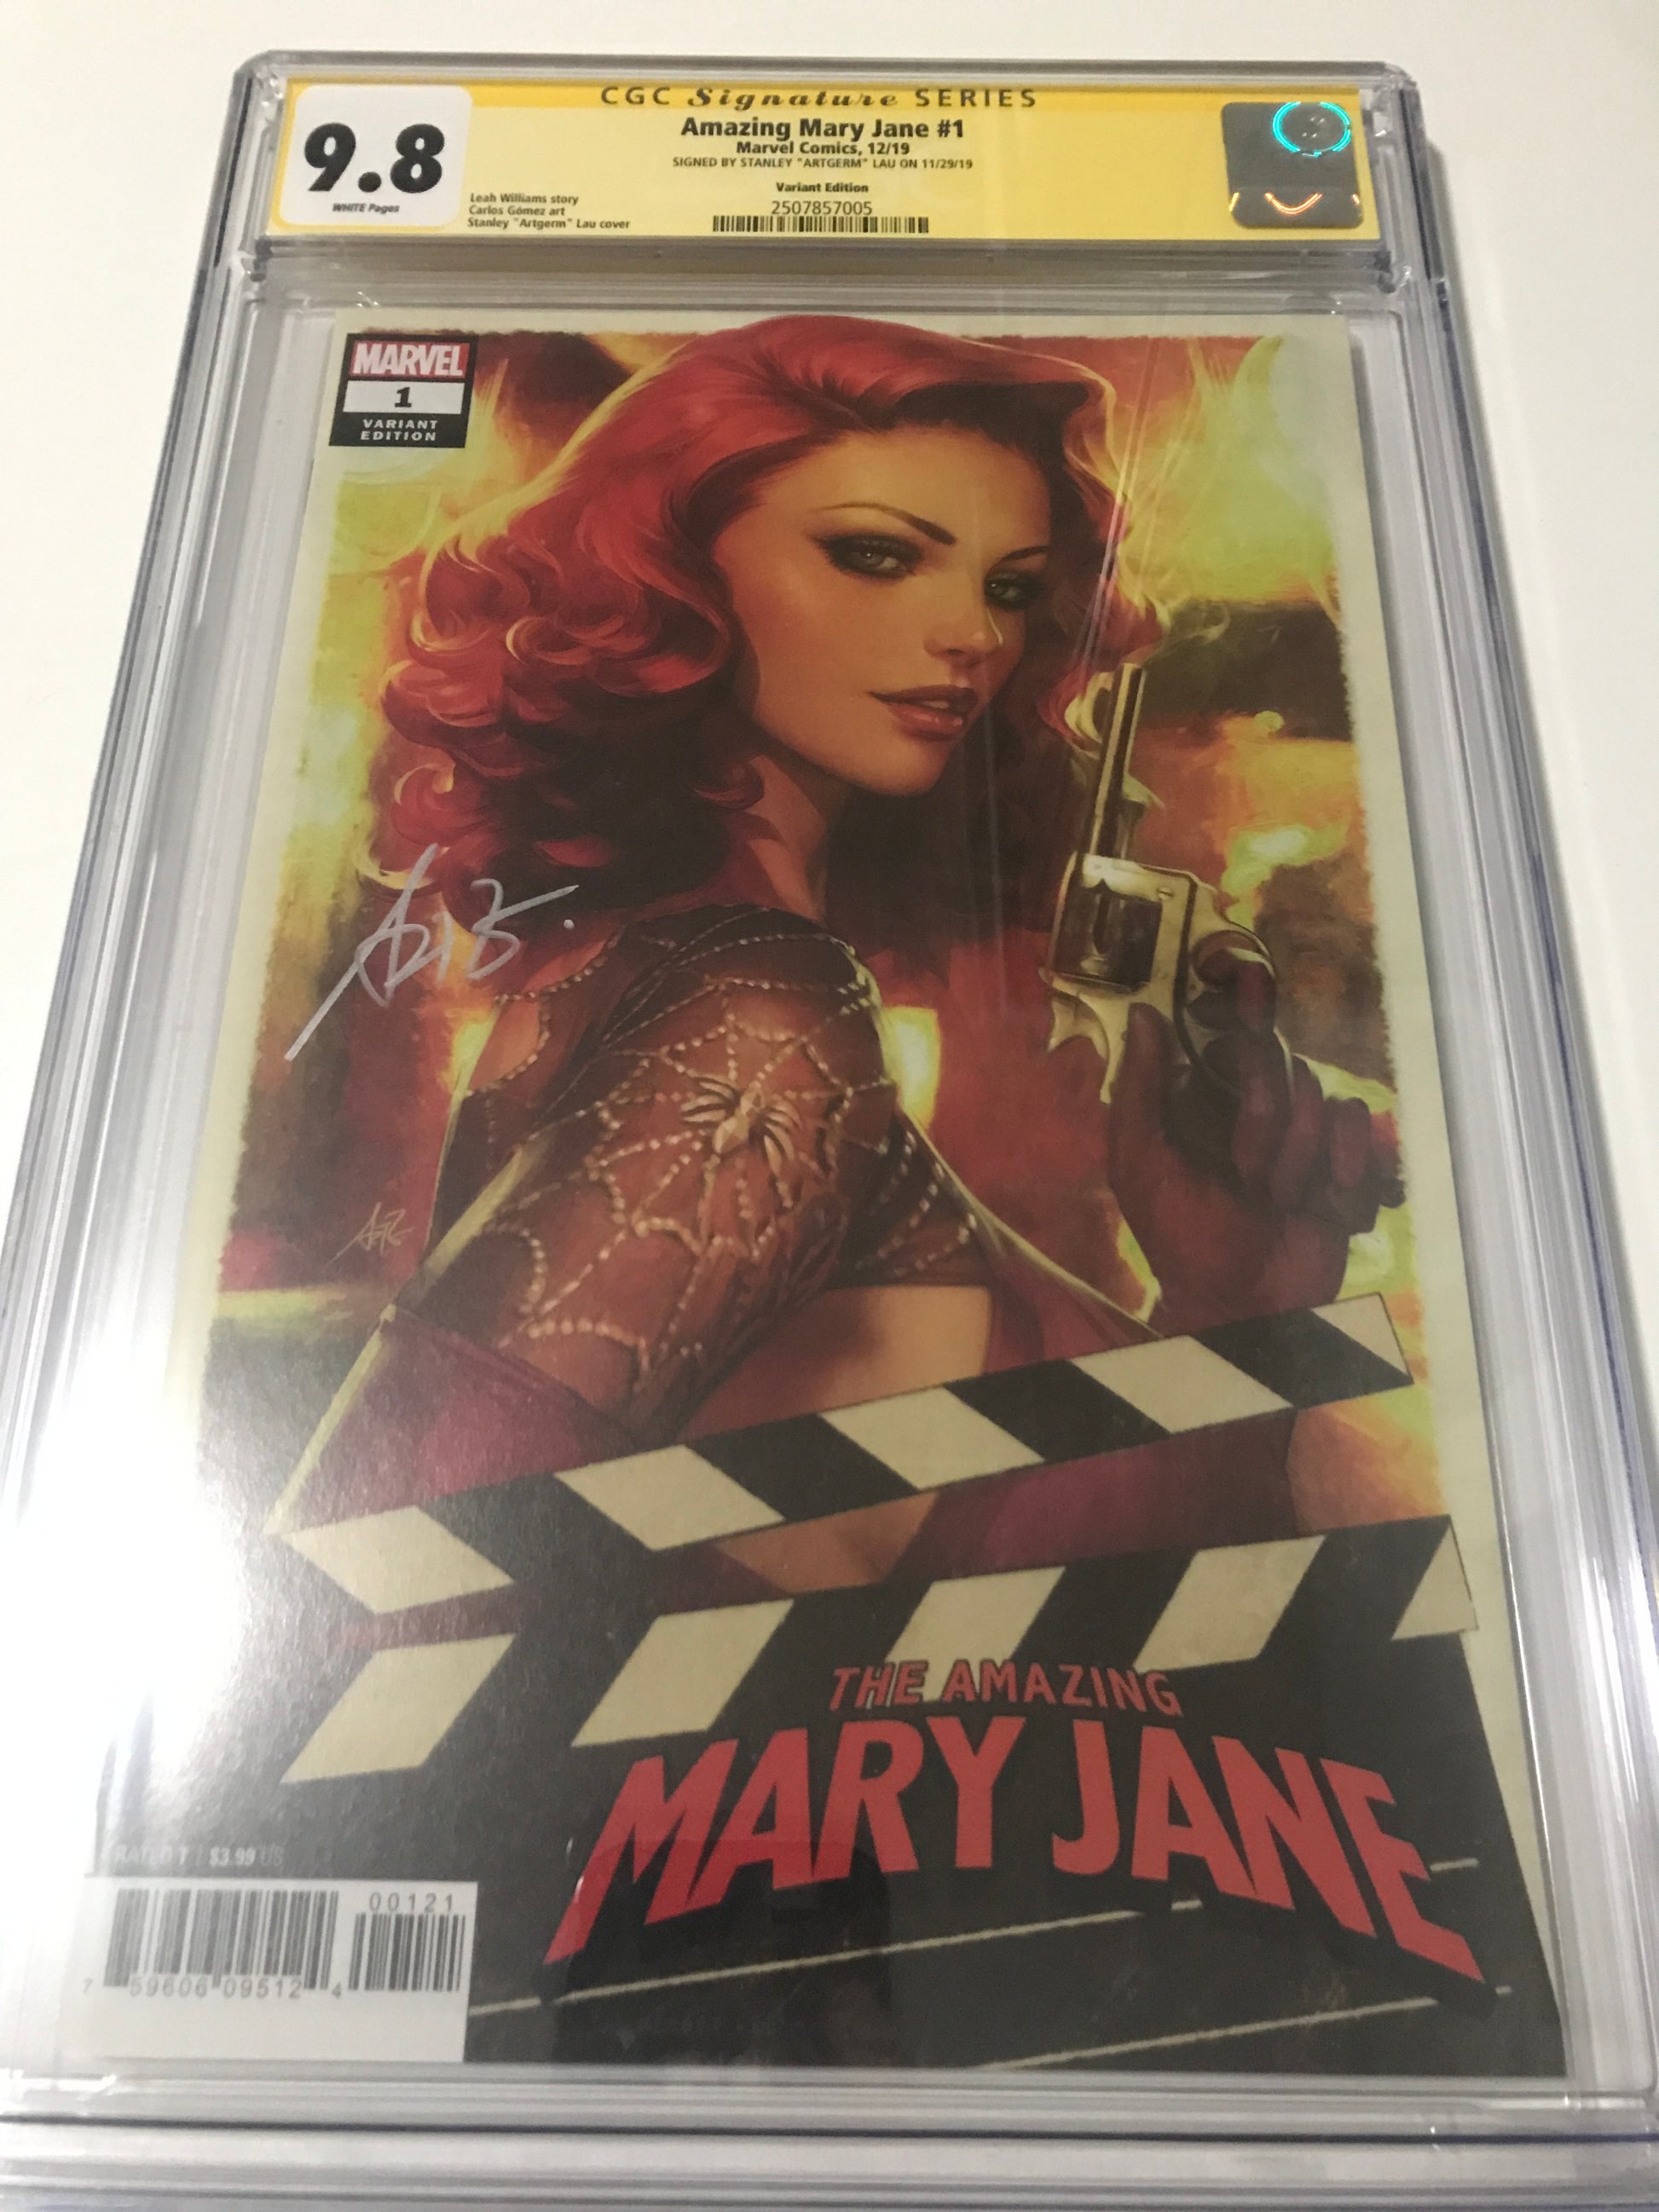 Amazing Mary Jane 1 - CGC Signed by Artgerm - Heroes Cave